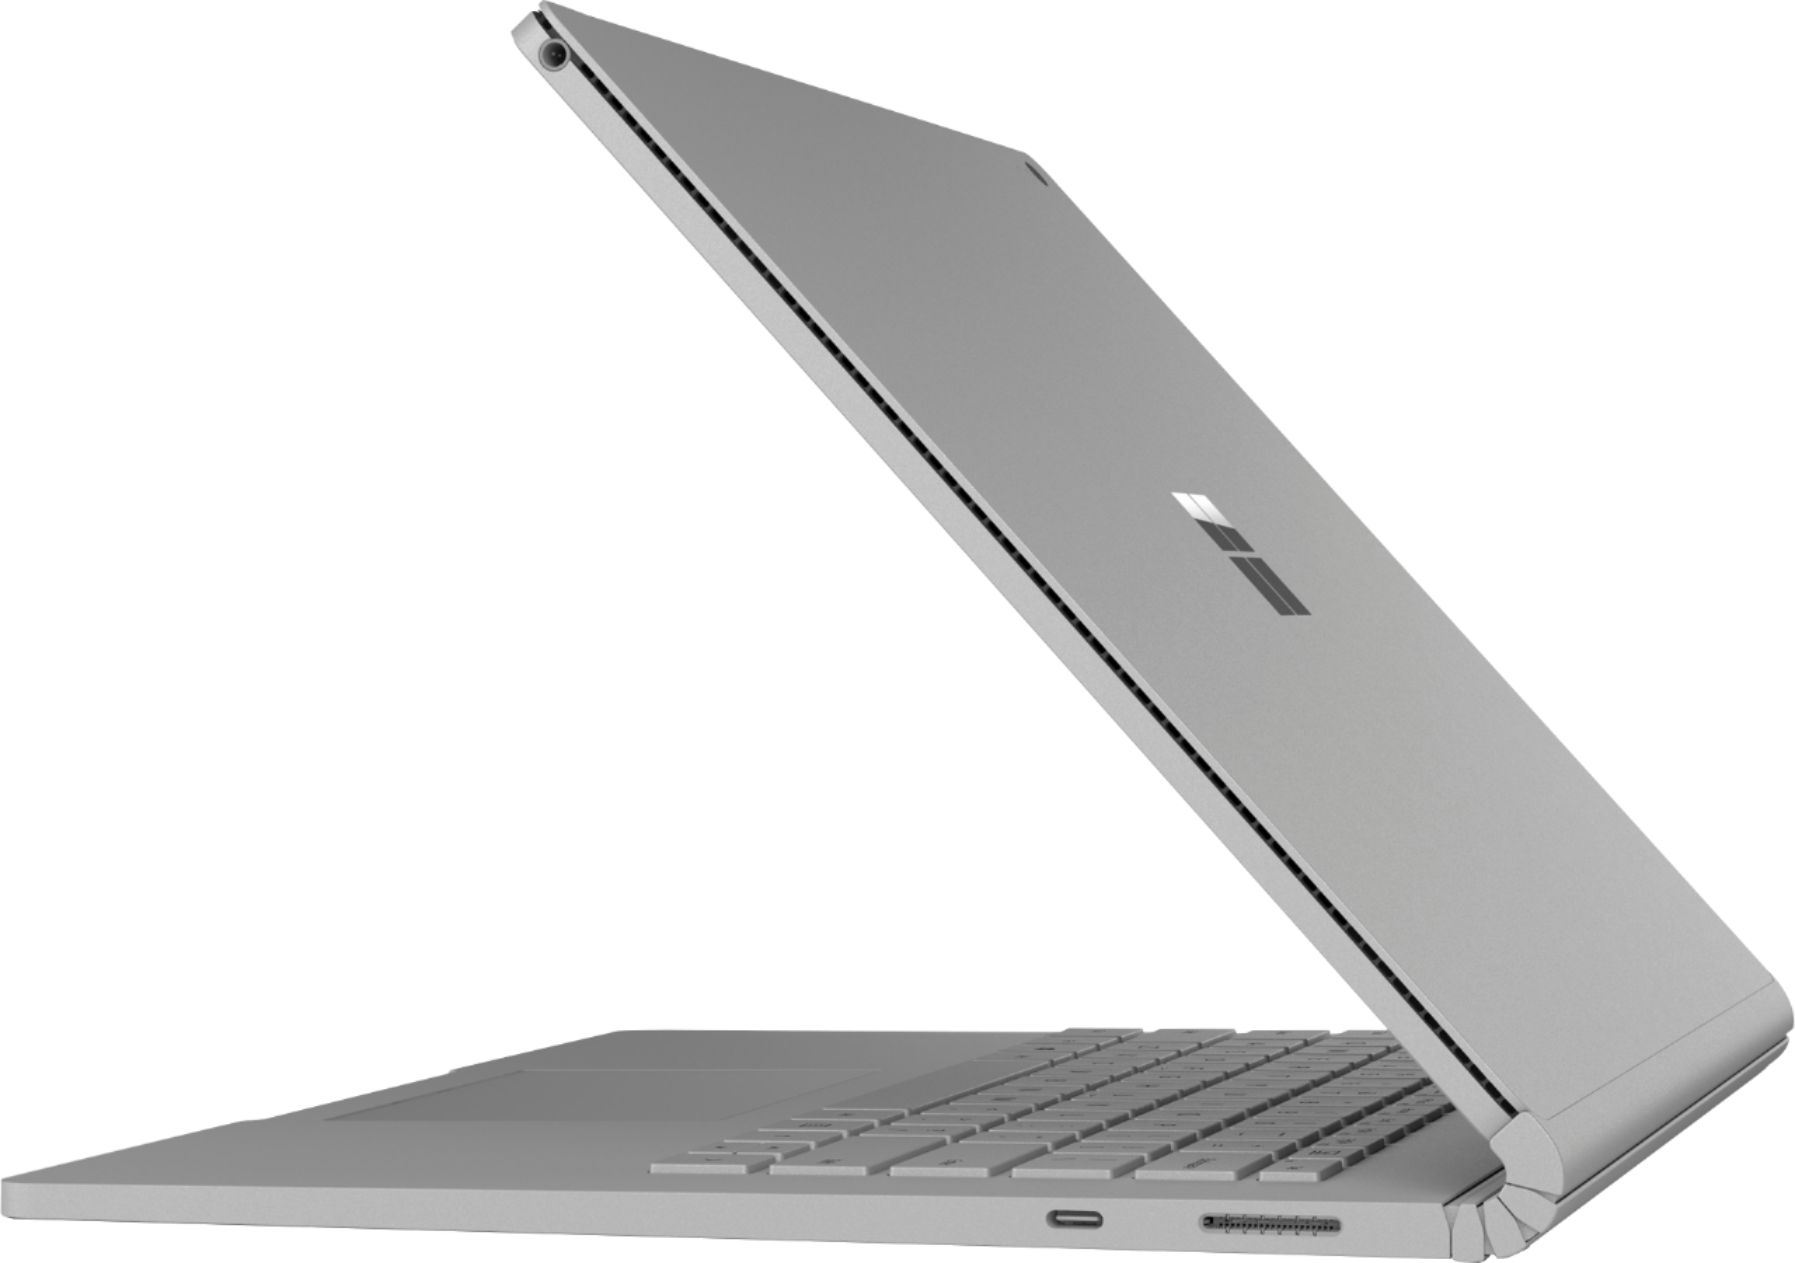 Left View: Microsoft - Geek Squad Certified Refurbished Surface Laptop 3 13.5" Touch-Screen - Intel Core i5 - 8GB Memory - 256GB SSD - Platinum